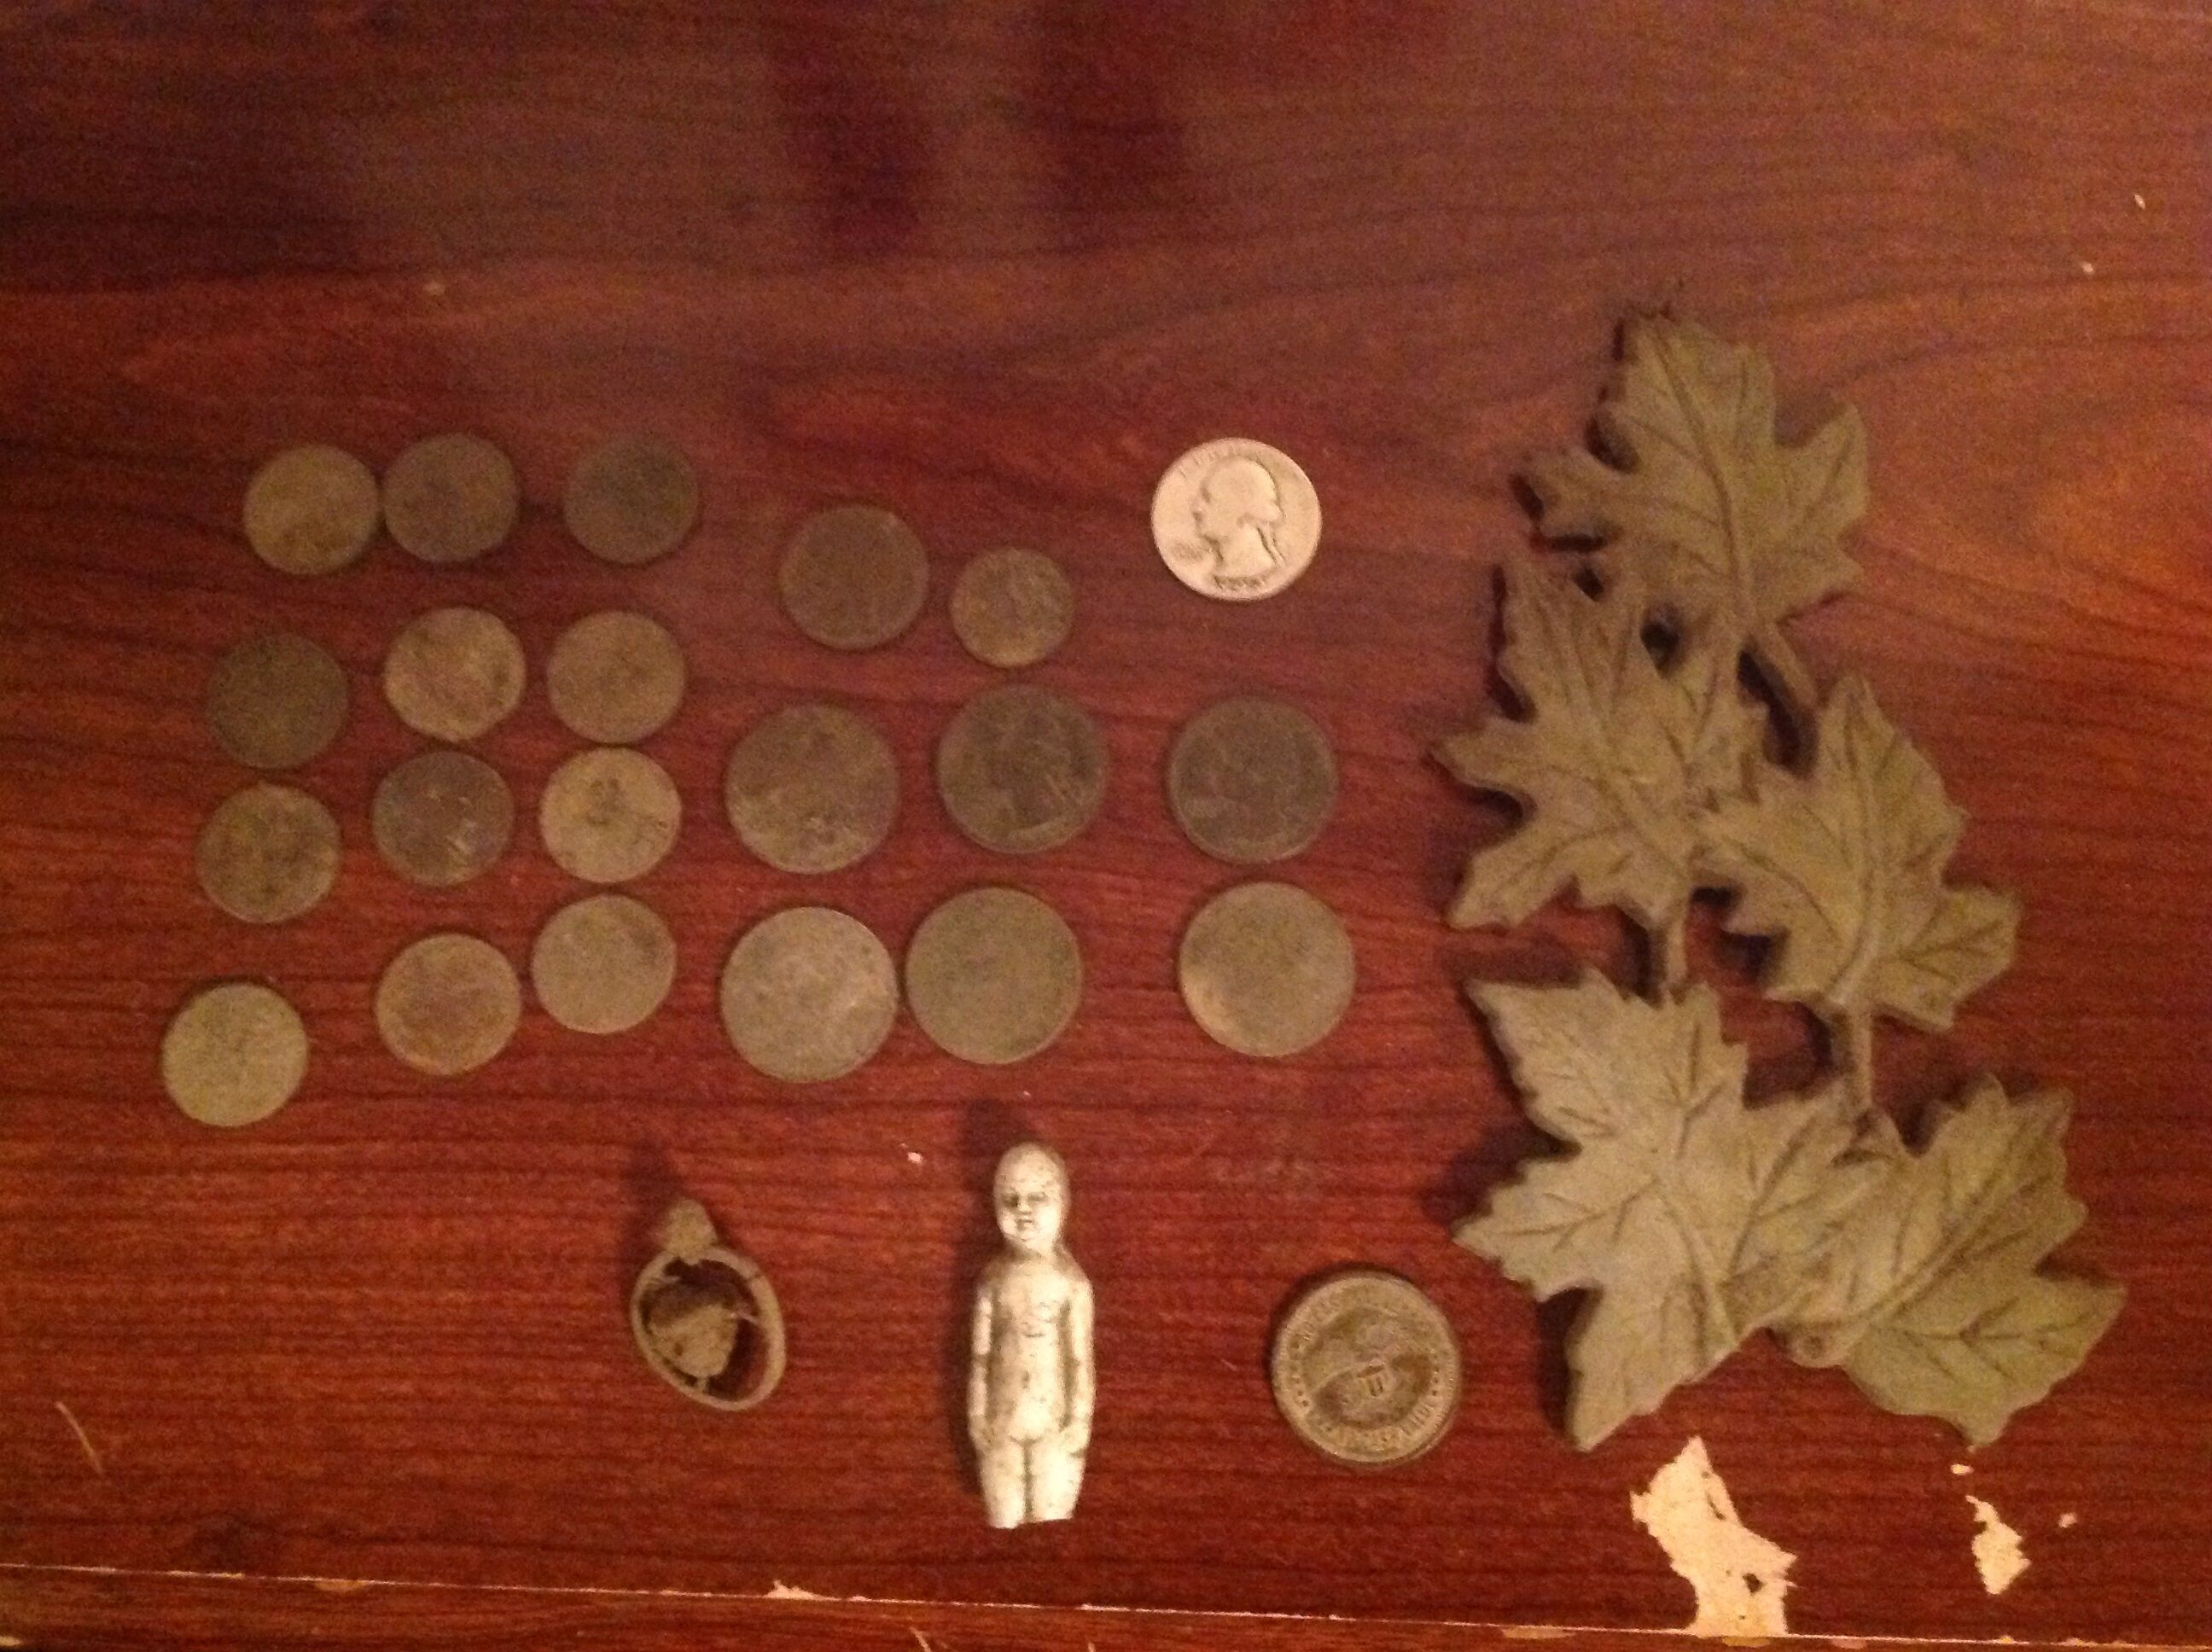 My finds with a silver quarter